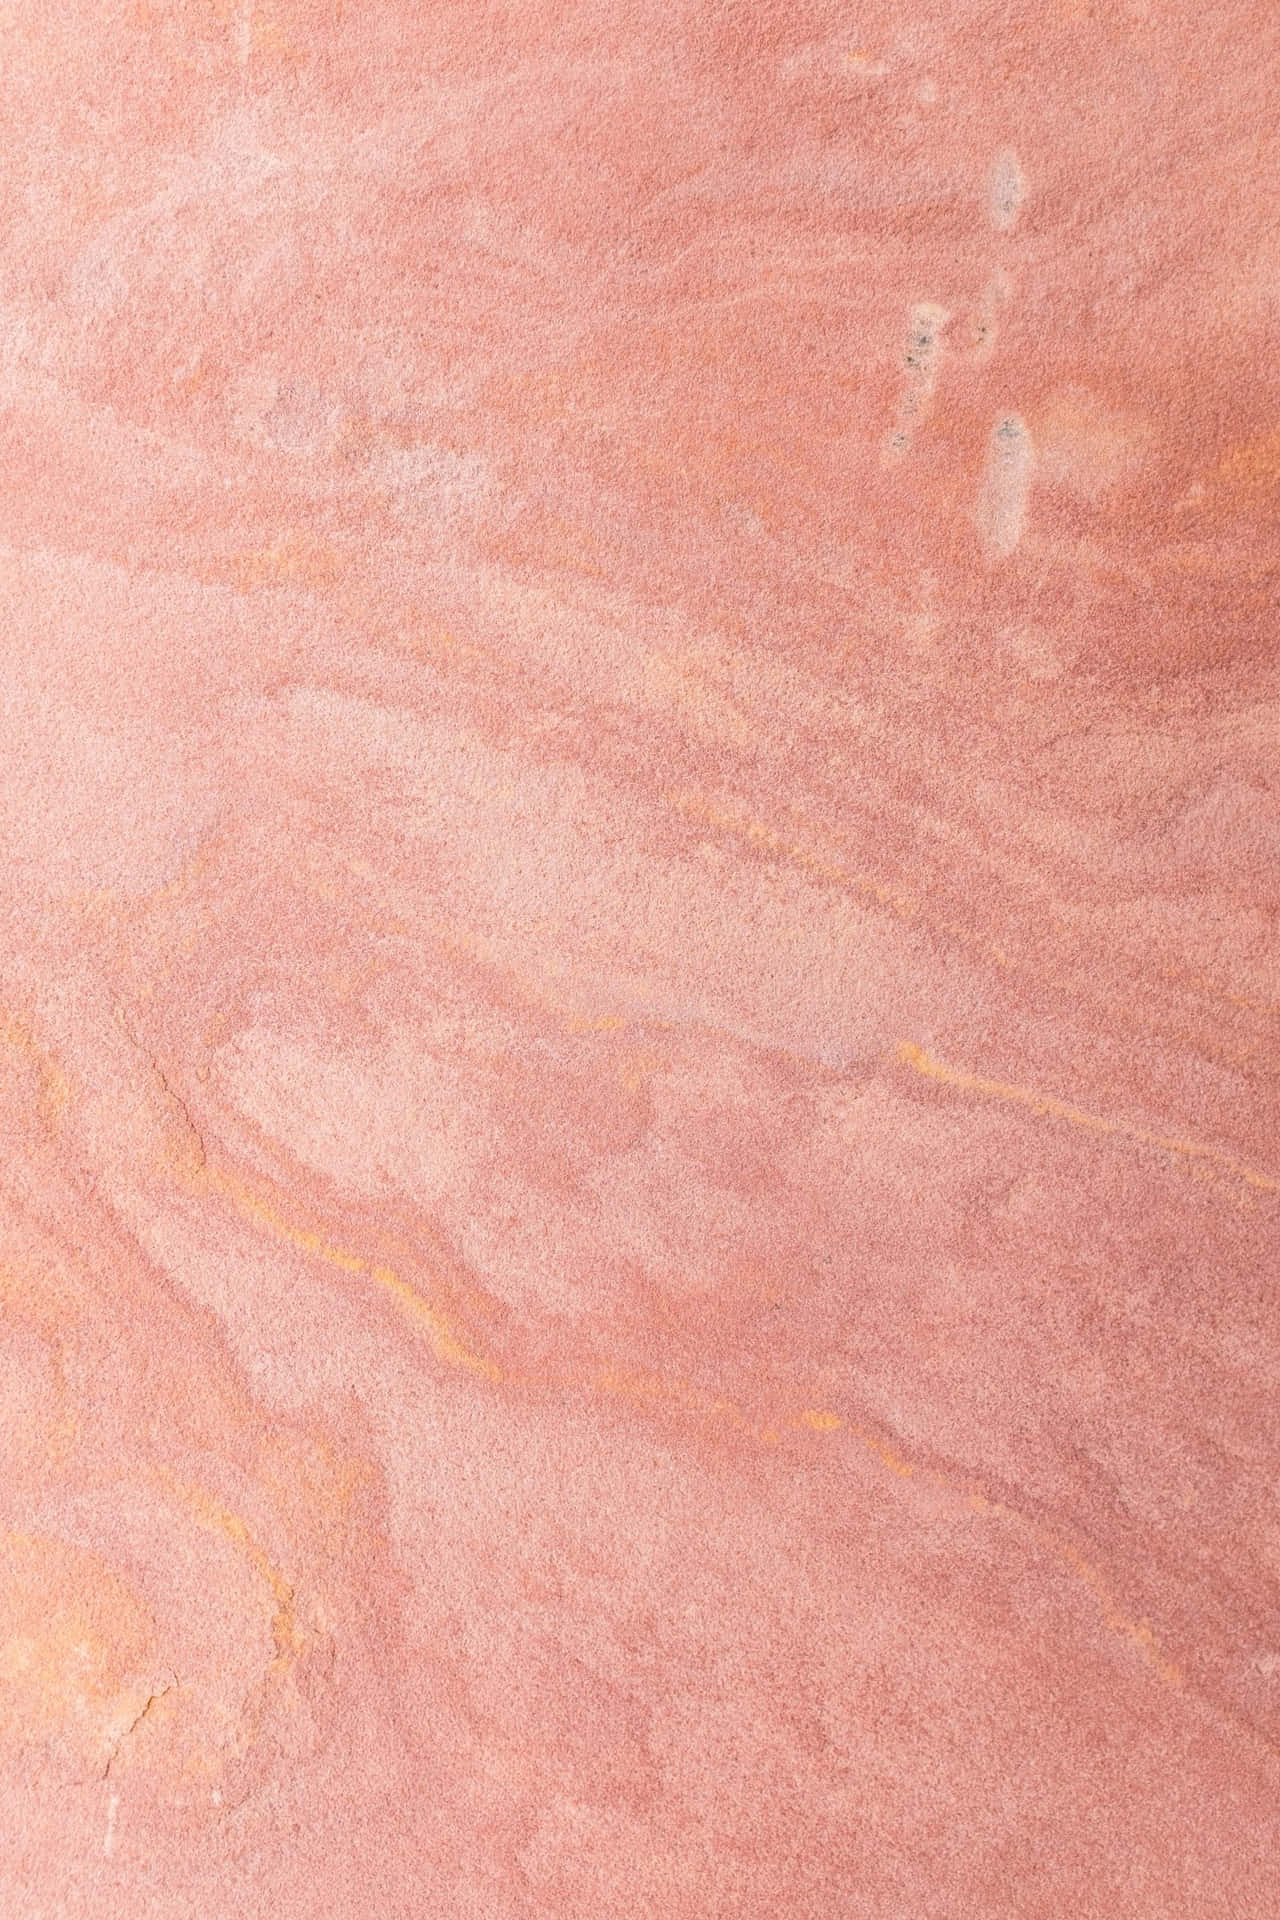 A Pink Marble Surface With A Yellow And Orange Pattern